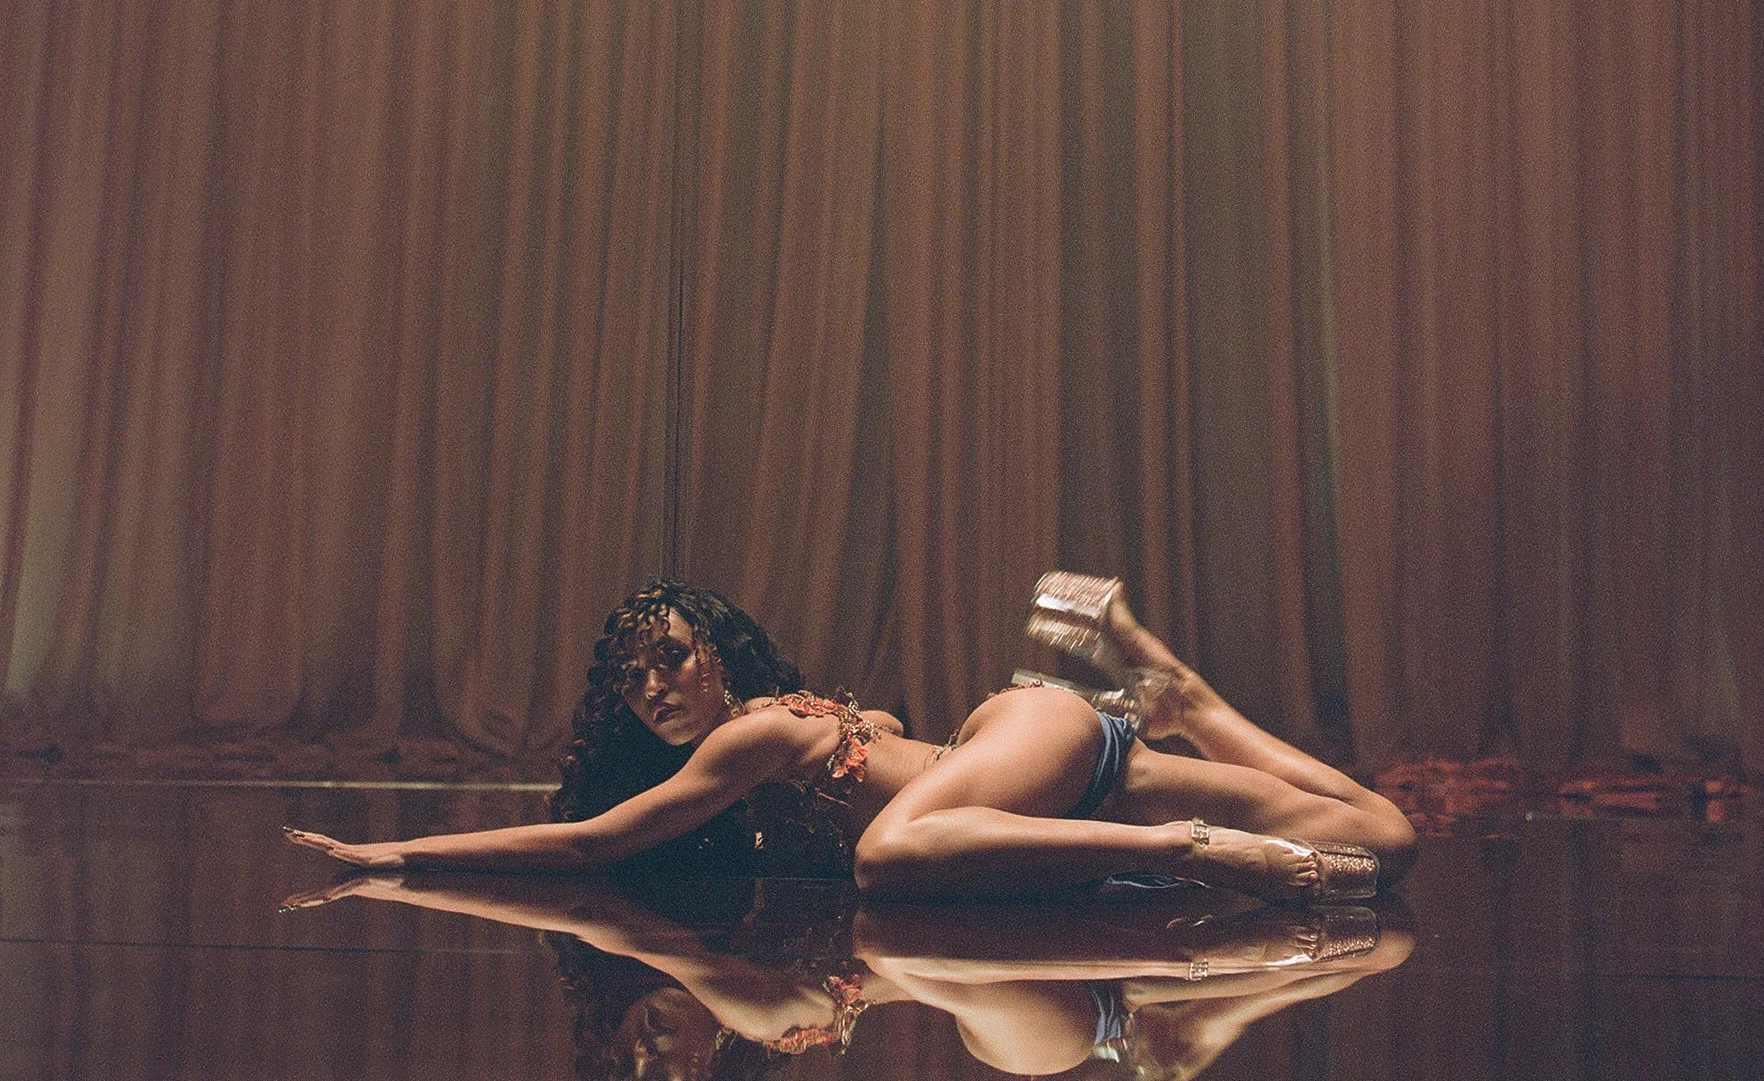 Cover Image - FKA twigs